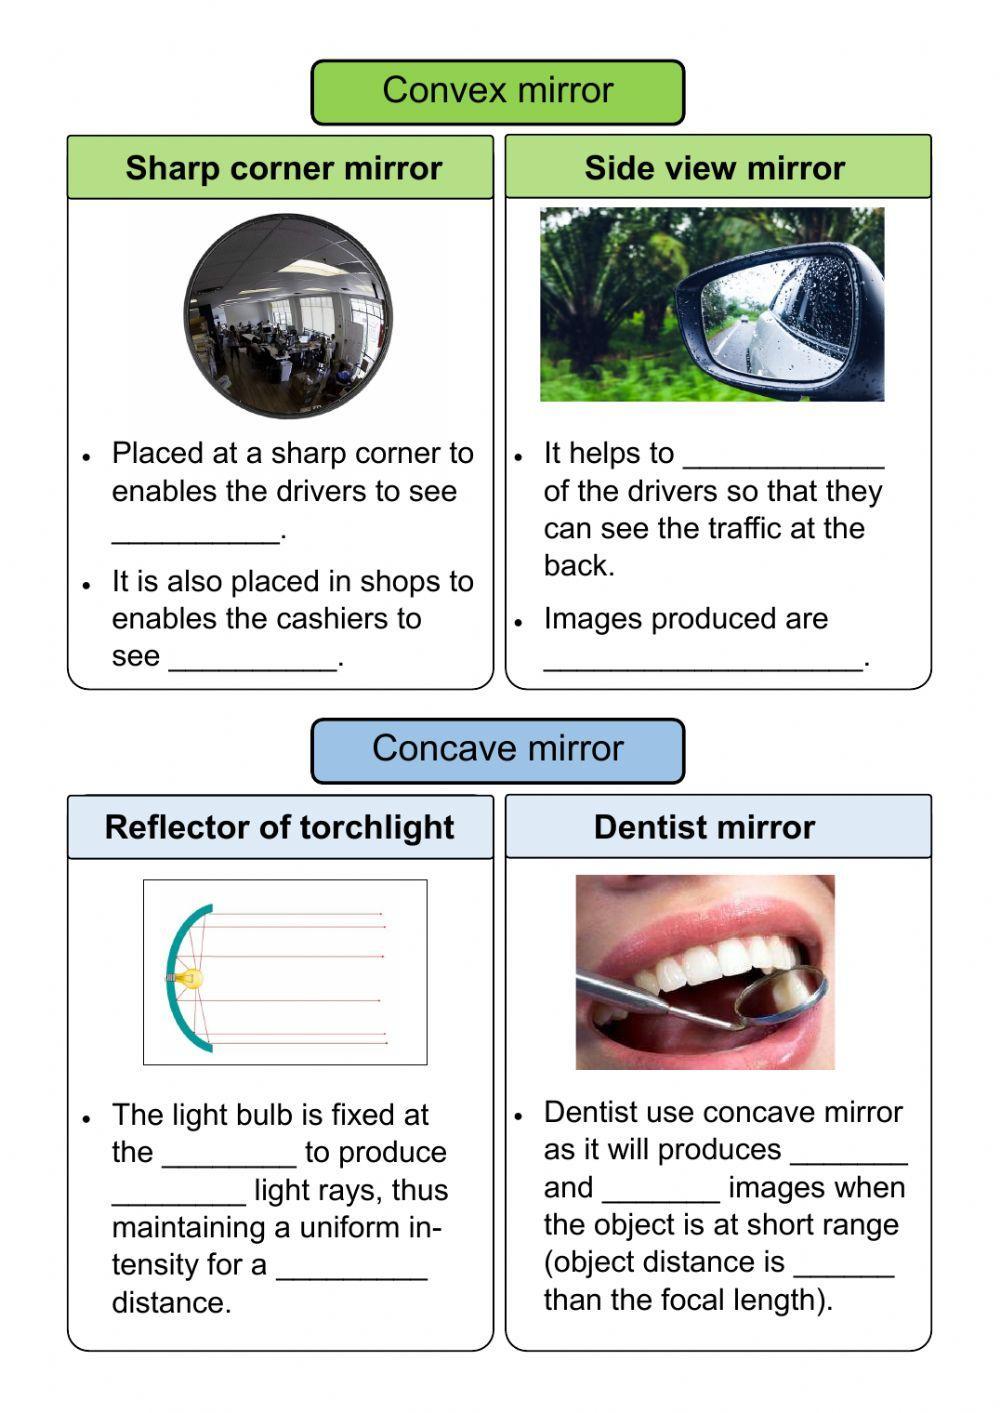 Applications of convex mirrors and concave mirrors